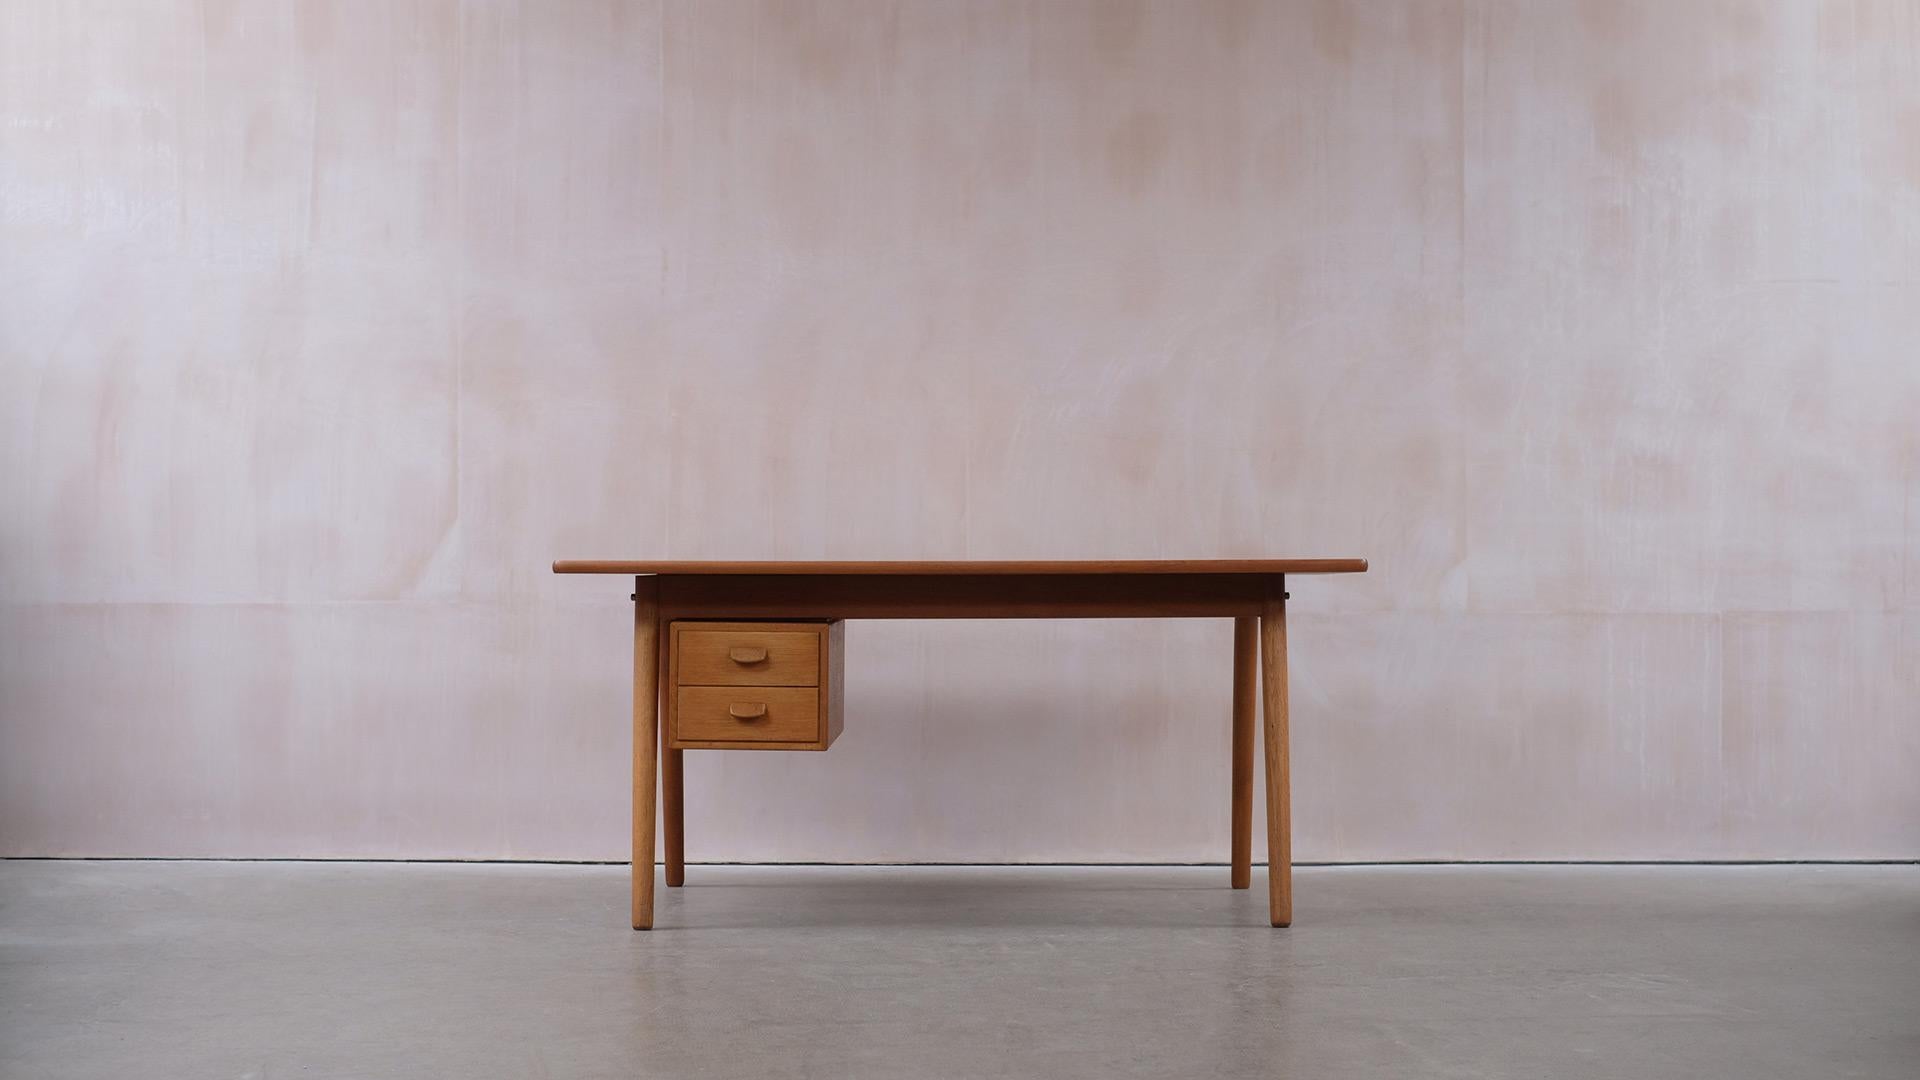 Fantastic and rare desk with oak legs and a contrasting teak top designed by Poul Volther for FBD, Denmark 1958. Great looking and high quality piece of classic Danish design.